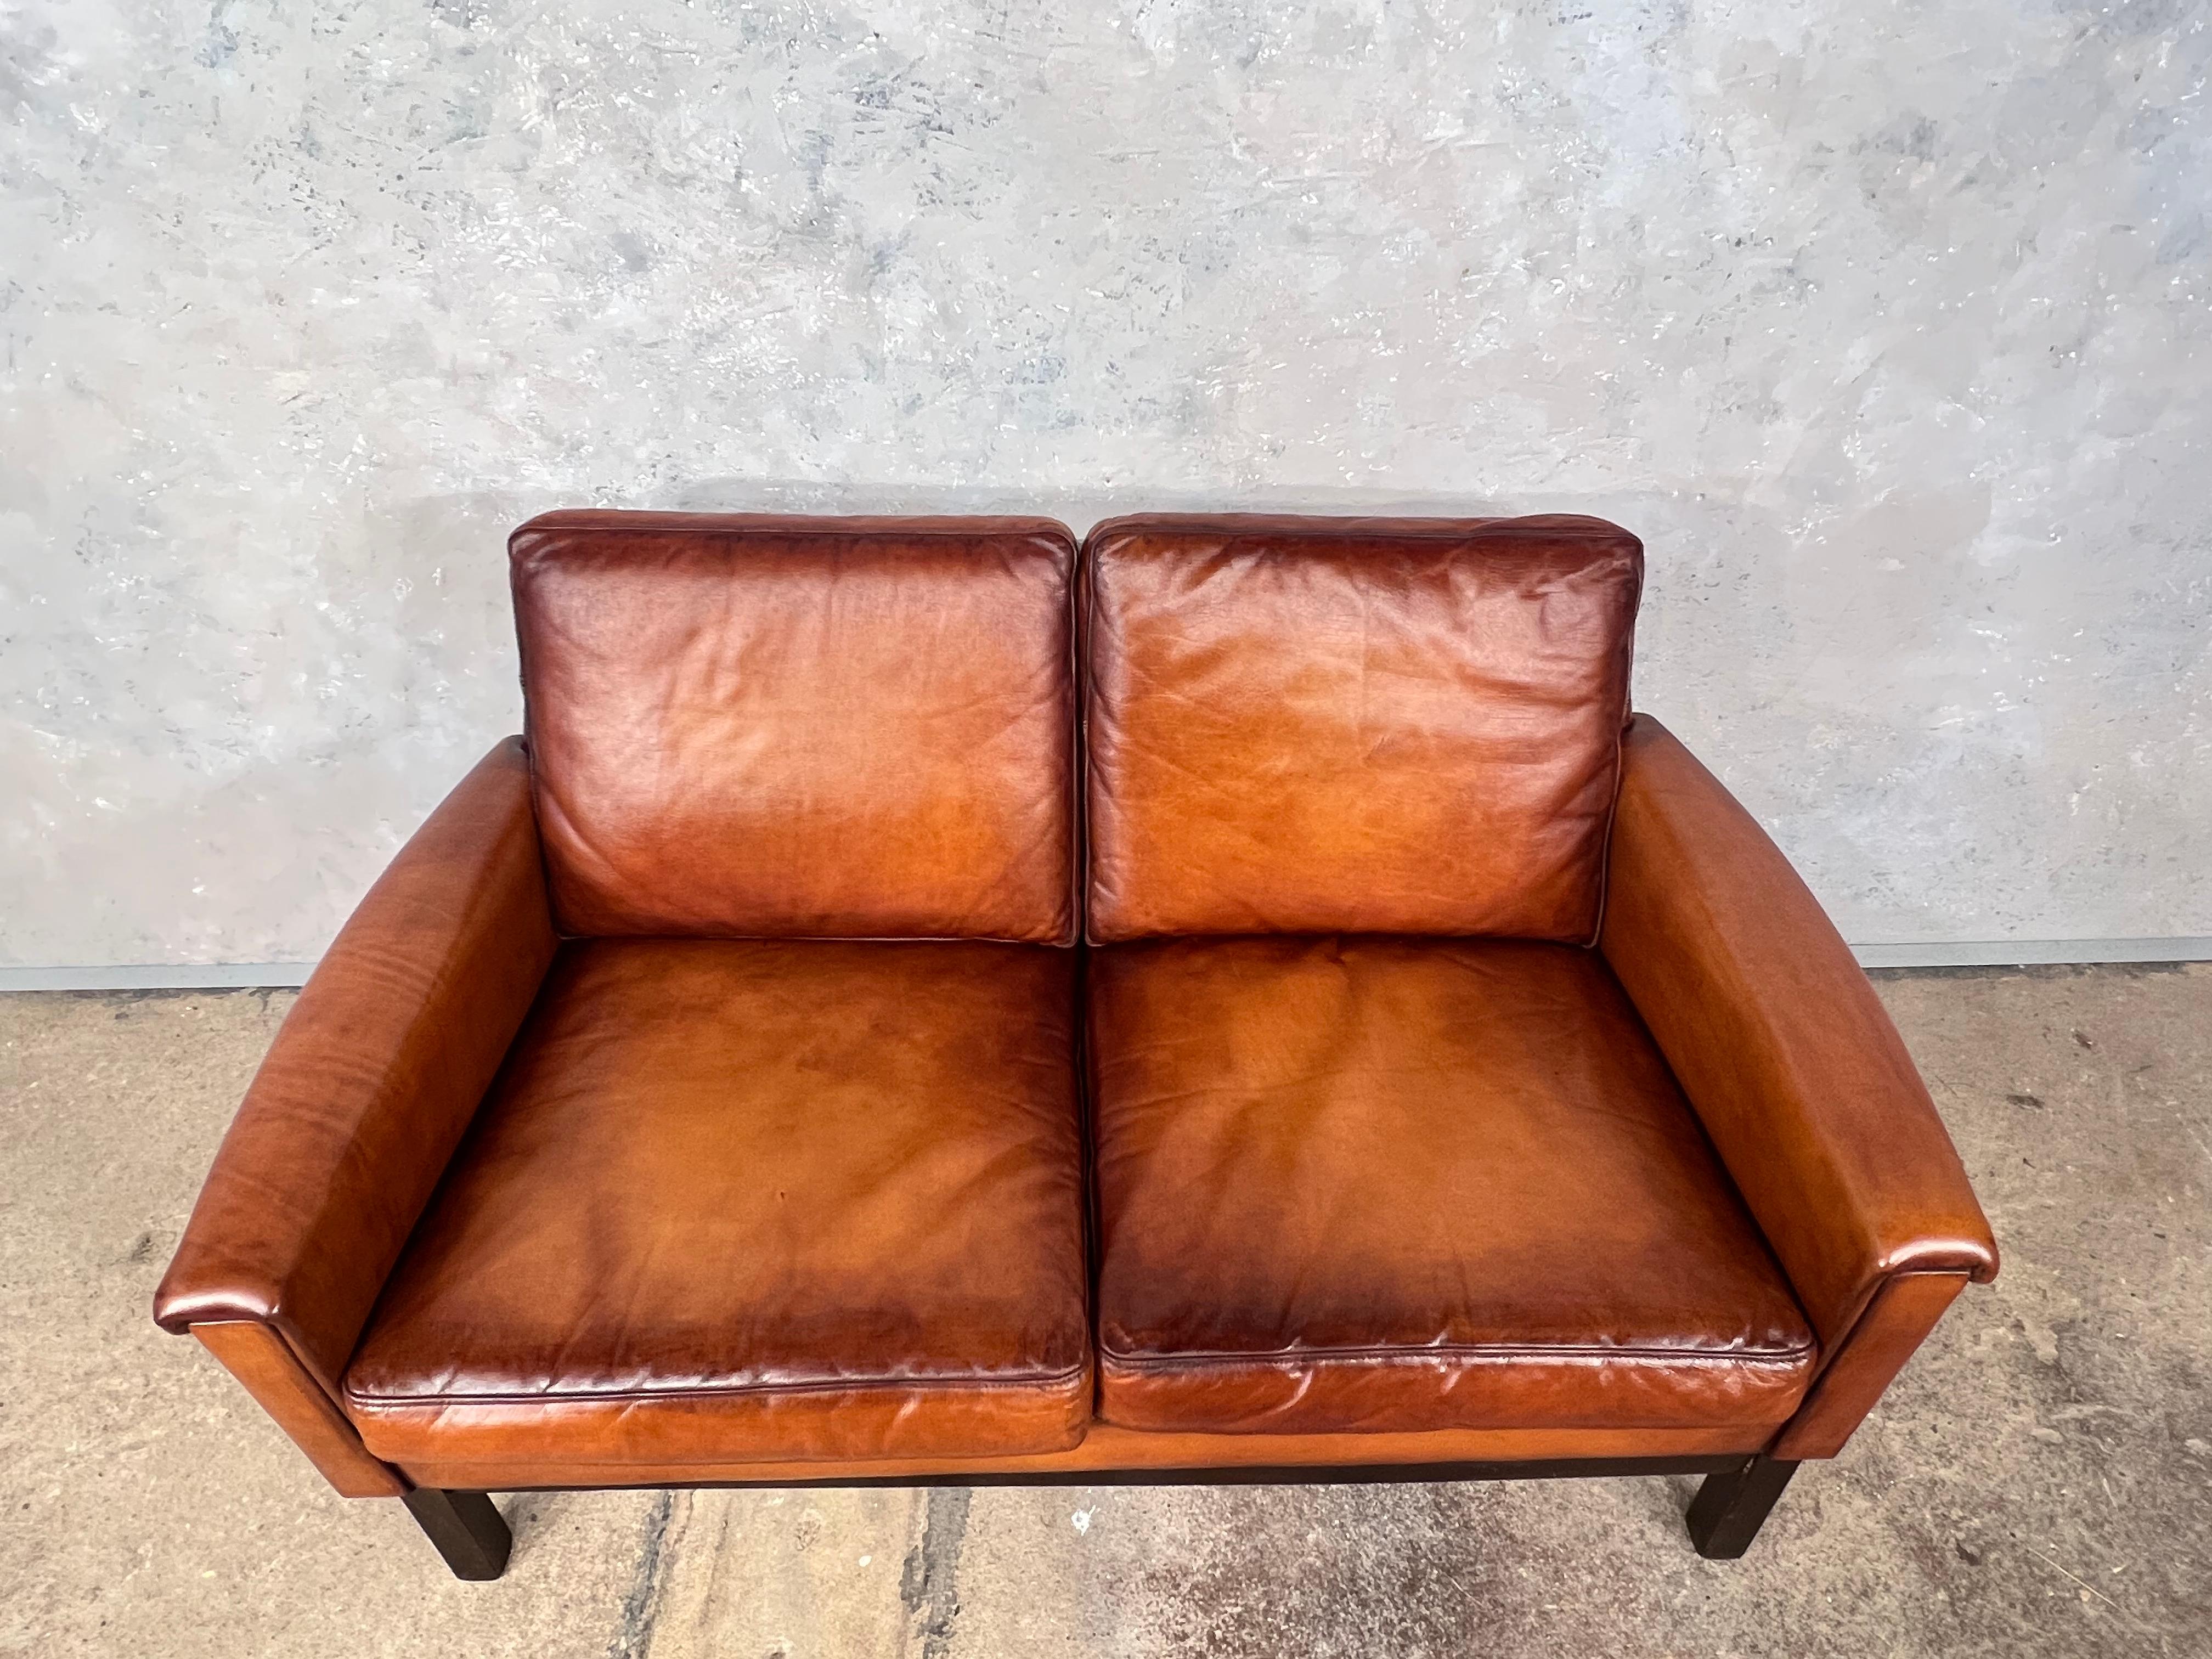 Vintage Danish 70s mid-century tan twoseater leather sofa.

Very stylish with a beautiful shape, compact size but still comfortable, great design, resting on a solid Beech plinth, in great vintage condition, restored and hand dyed a beautiful tan